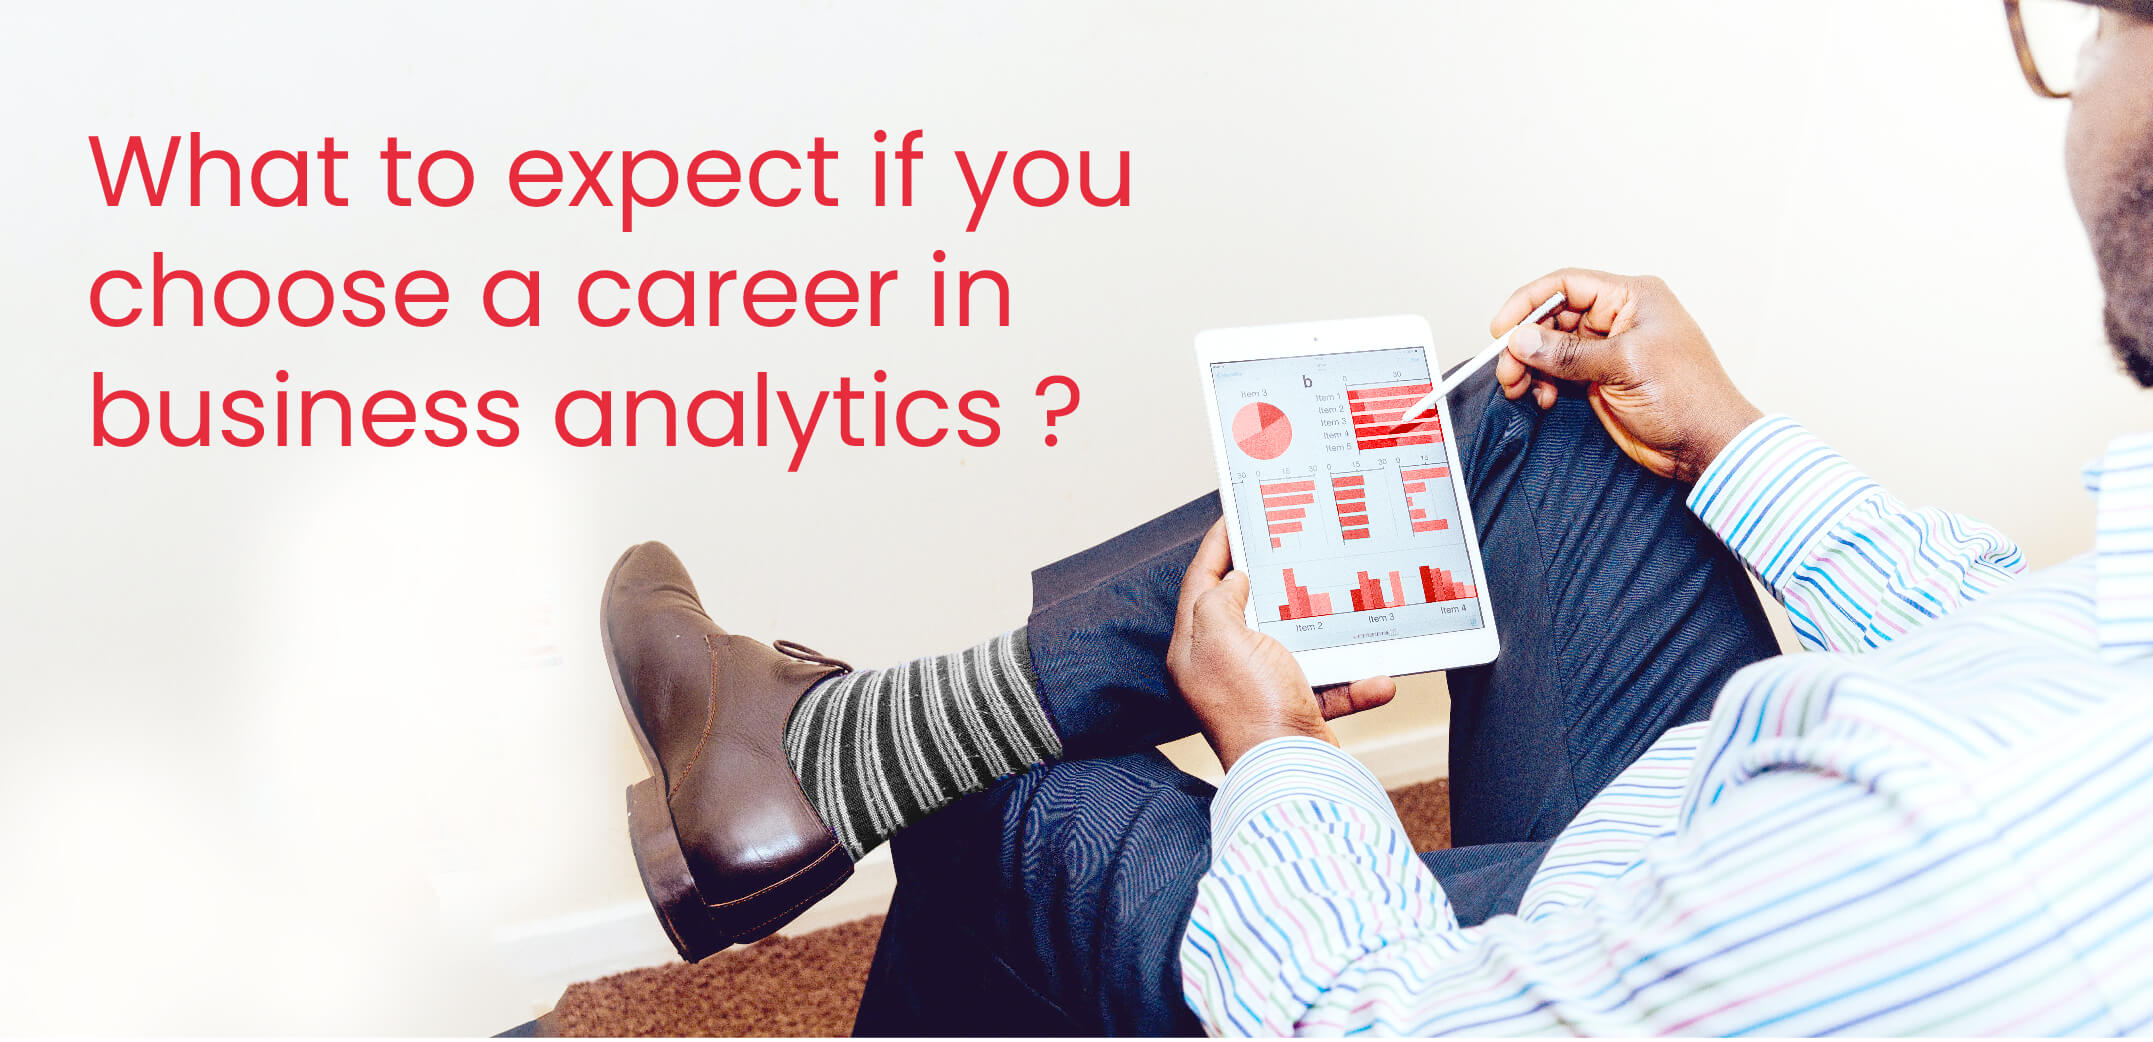 What to Expect if You Choose a Career in Business Analytics ?